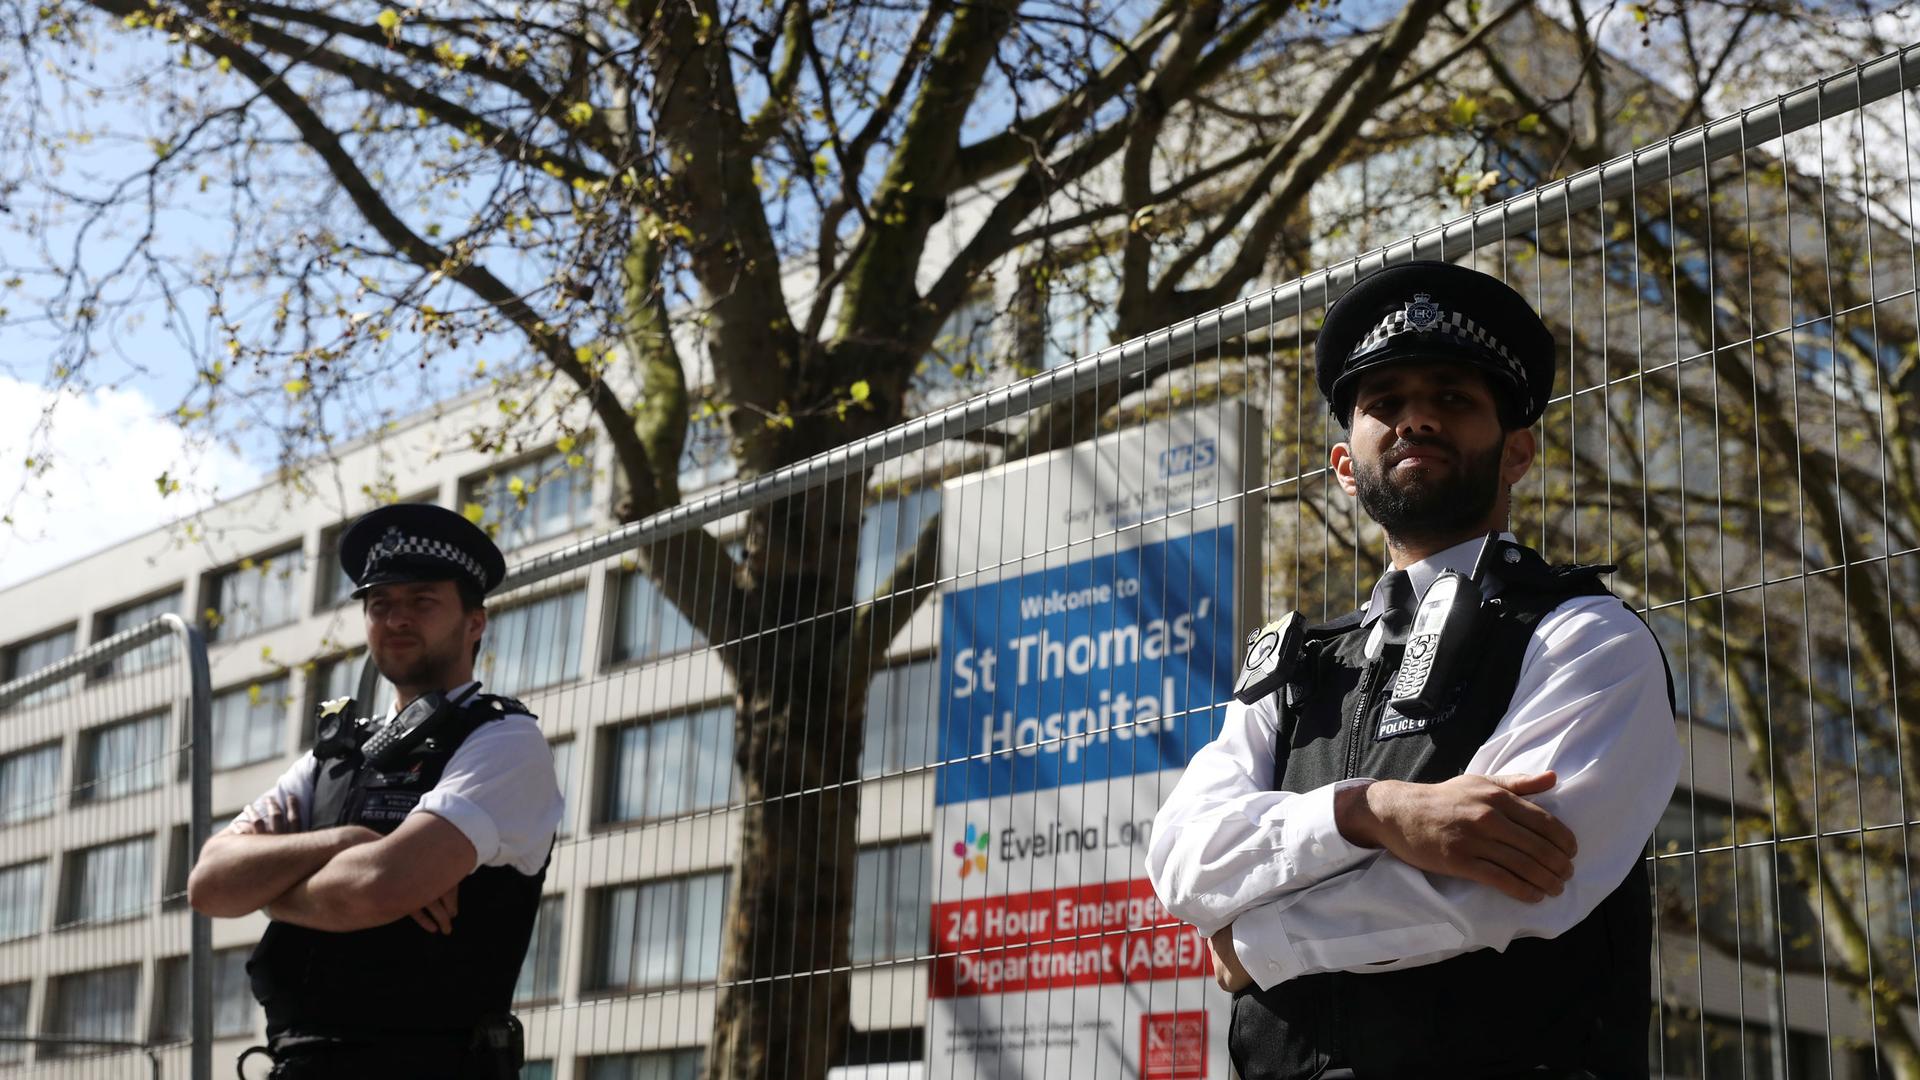 Two police officers are shown with their arms folded and standing in front of a fence with St Thomas' Hospital  in the background.